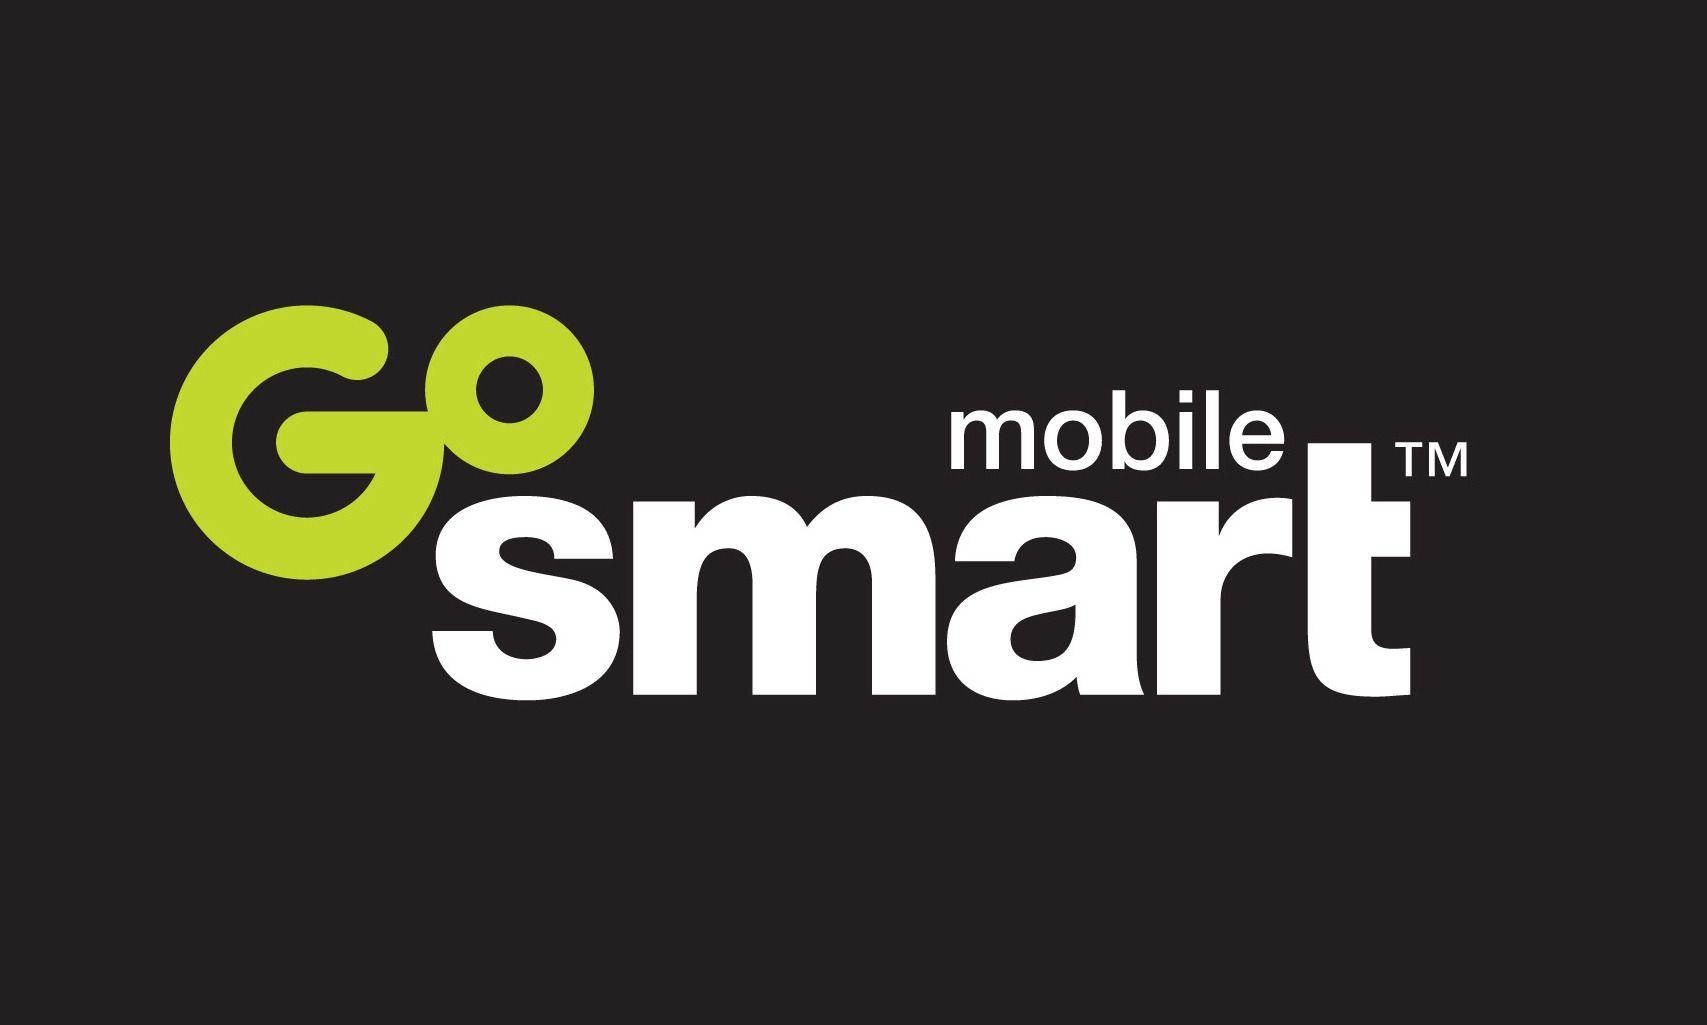 Boost Wireless Logo - T Mobile's GoSmart Hopes To Boost Data Use By Offering Free Facebook